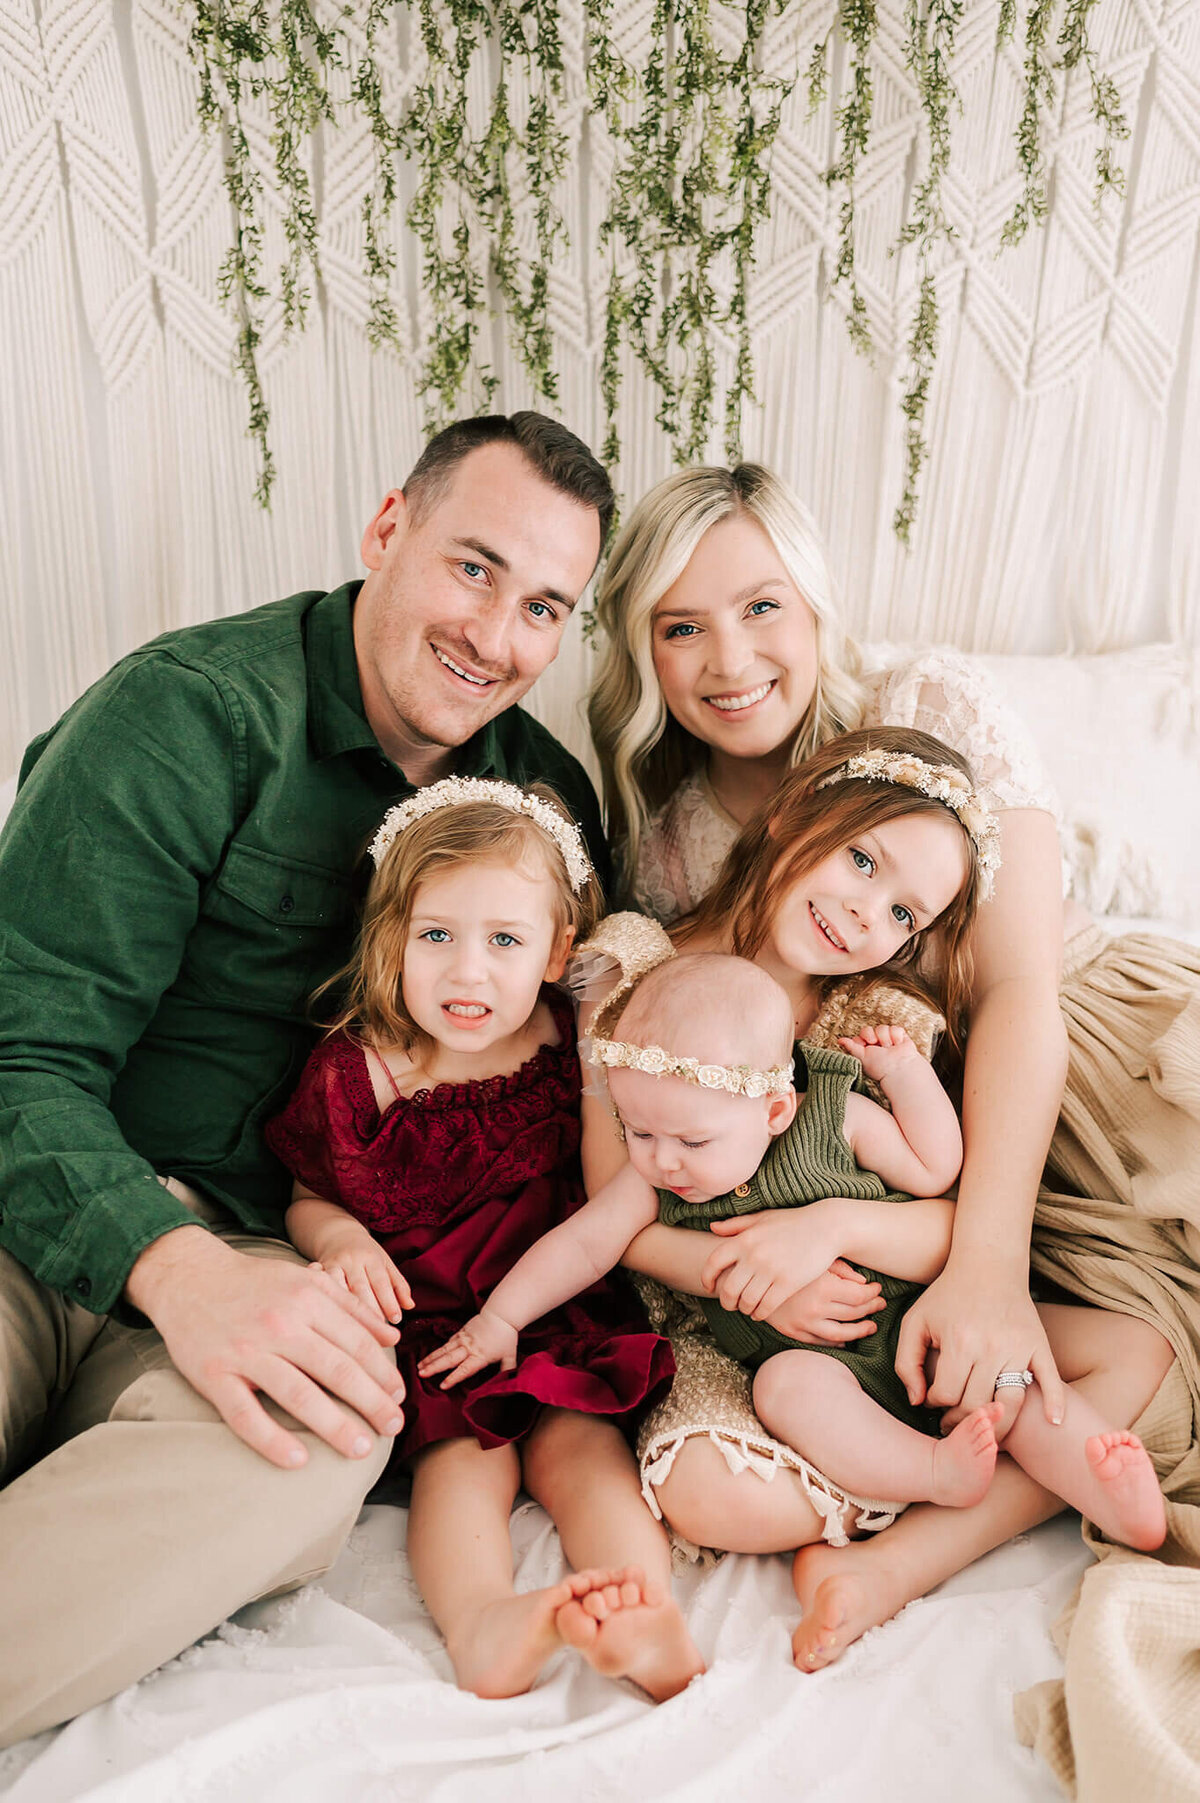 Springfield MO family photographer The XO Photography captures family hugging and smiling in bed